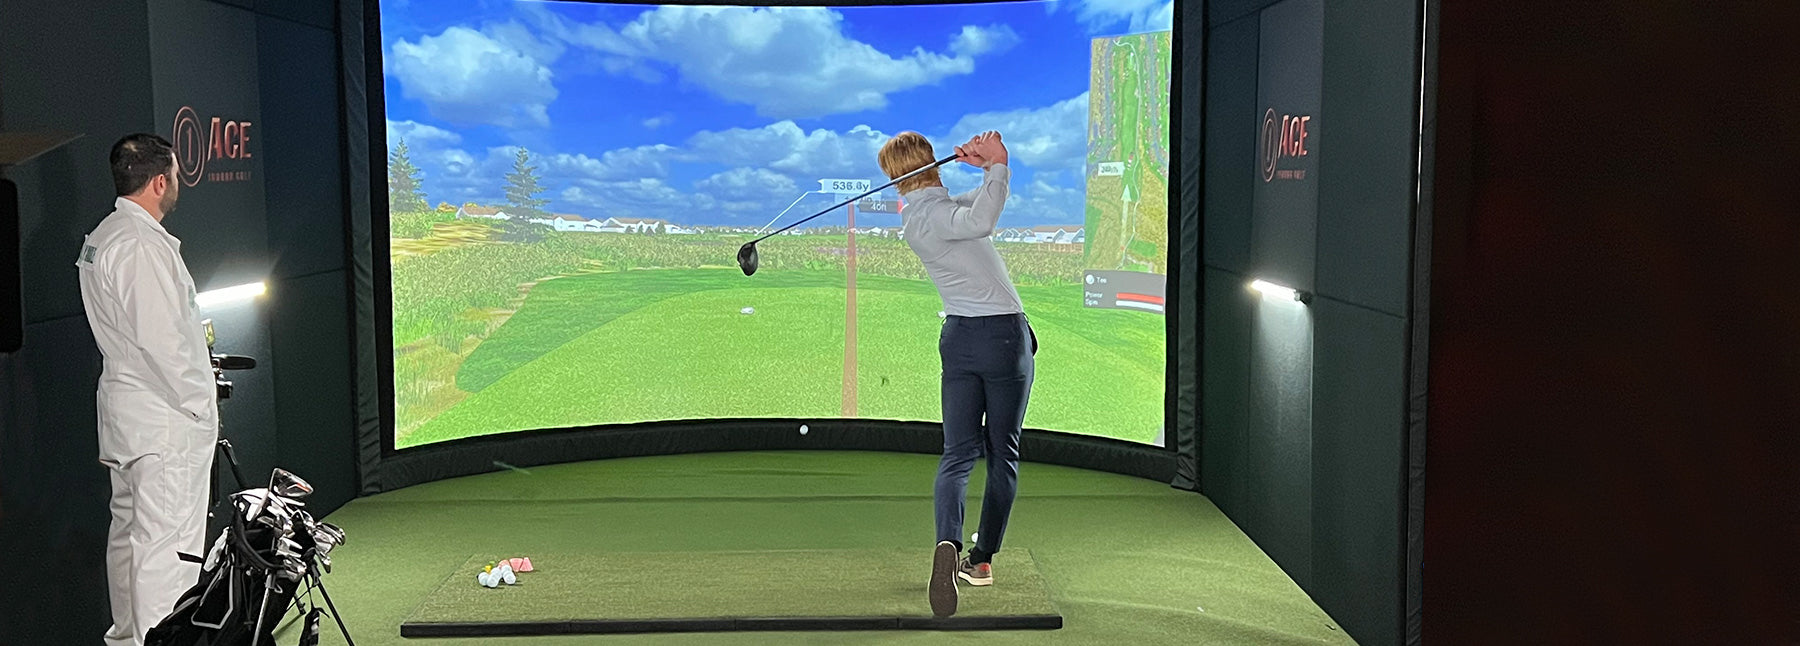 A List of 10 Super Fun Games to Play on Your Golf Simulator